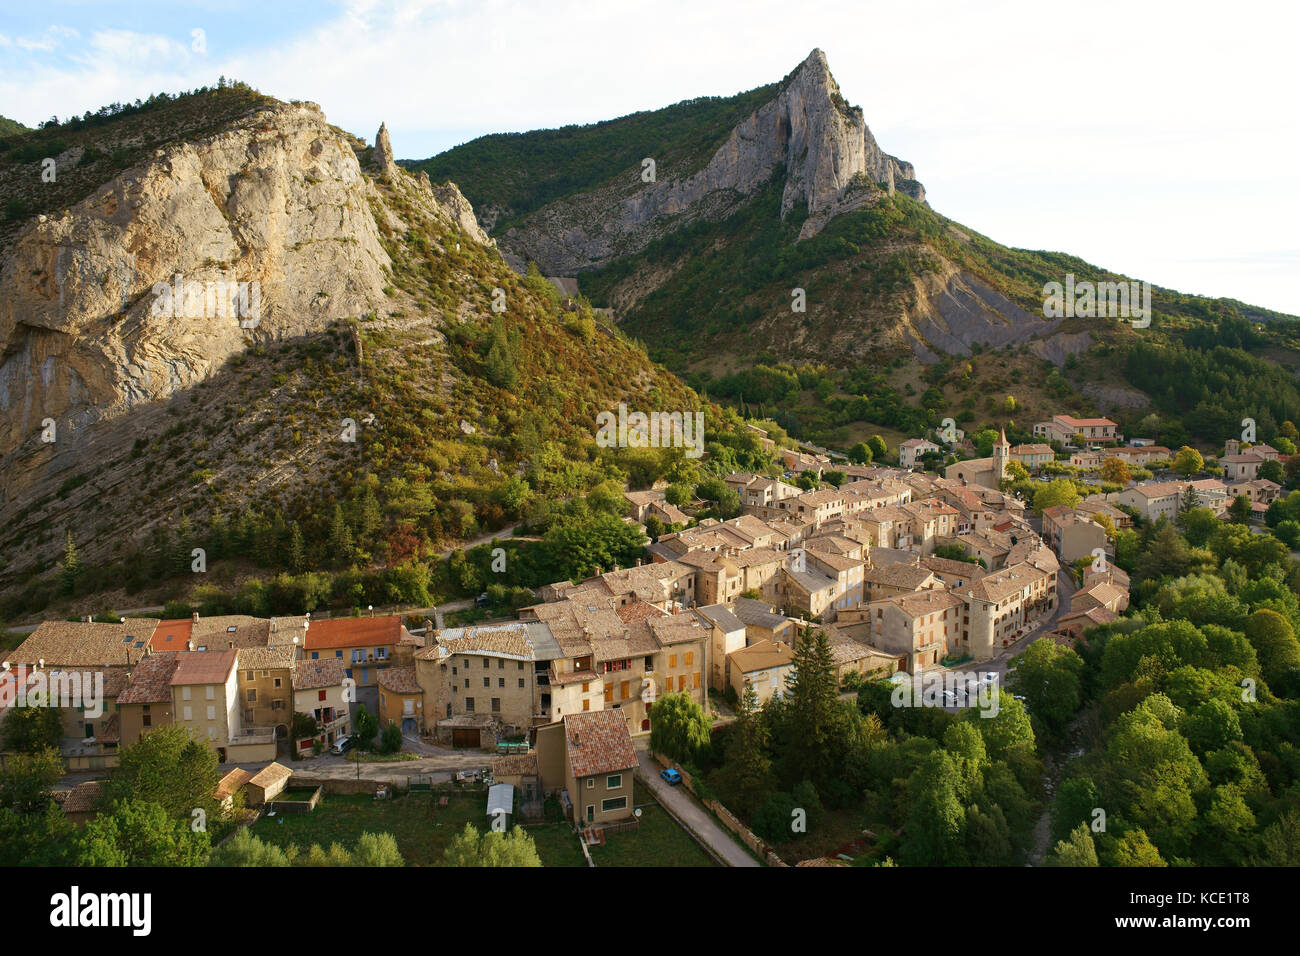 Picturesque medieval village surrounded by magnificent cliffs, this is a well known spot for climbing enthusiasts. Orpierre, Hautes-Alpes, France. Stock Photo